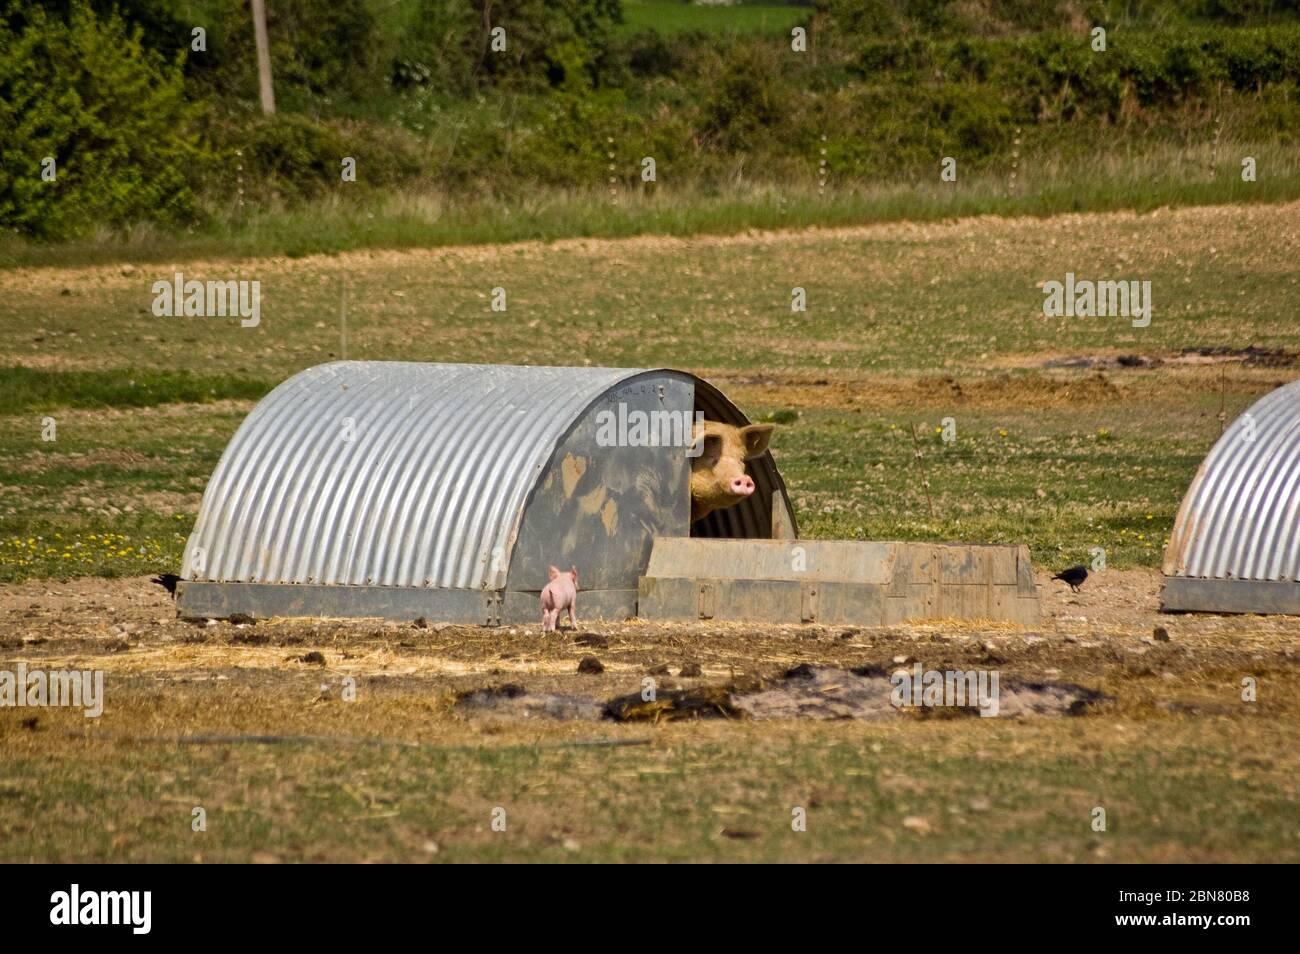 A small pink piglet runs towards it's sty where it's mother is waiting. Stock Photo